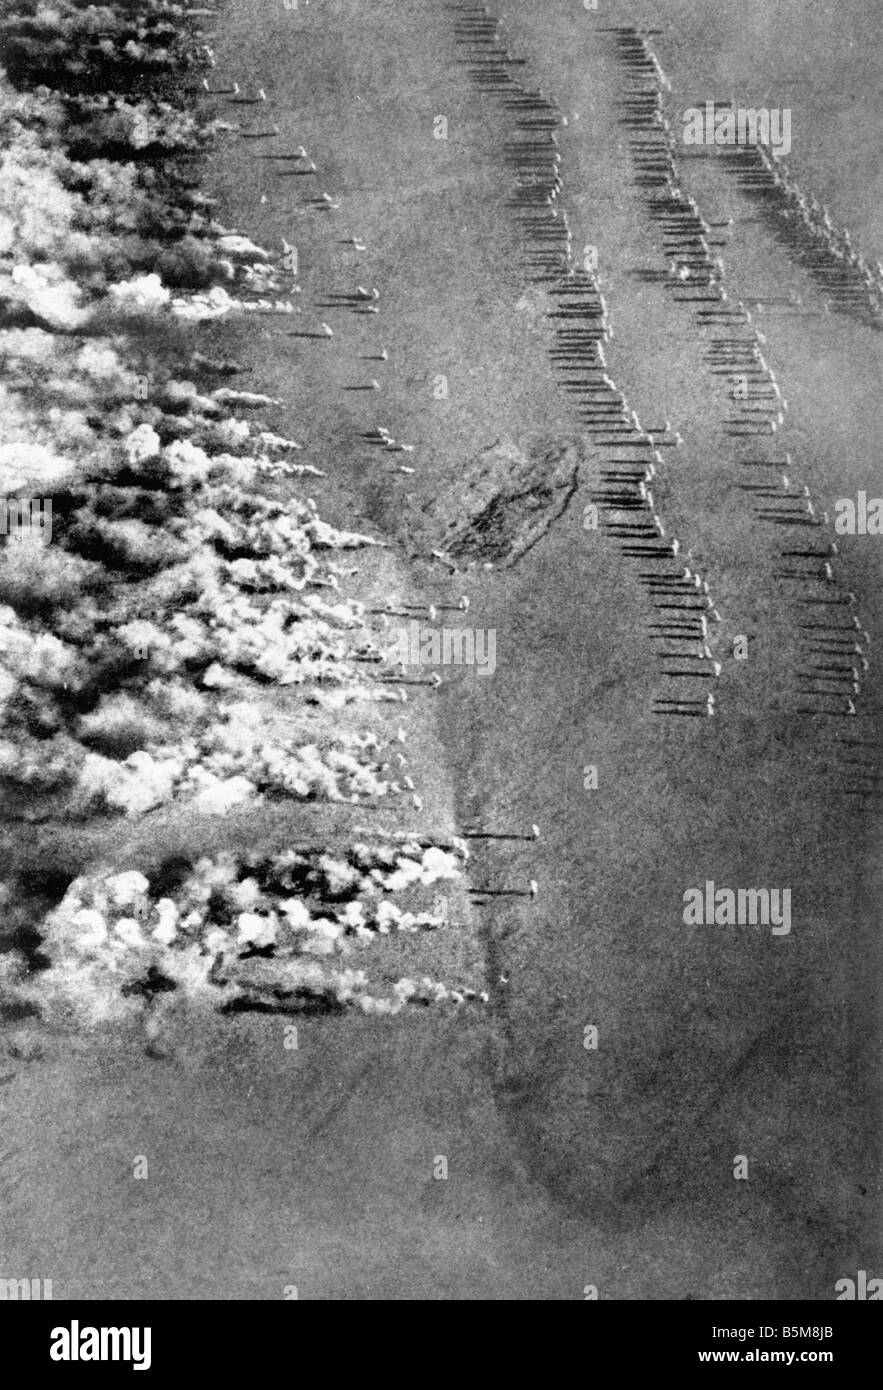 2 G55 G1 1915 1 Gas attack Aerial view WWI 1915 History World War I Gas war A gas attack on the Eastern front Photo taken from a Stock Photo